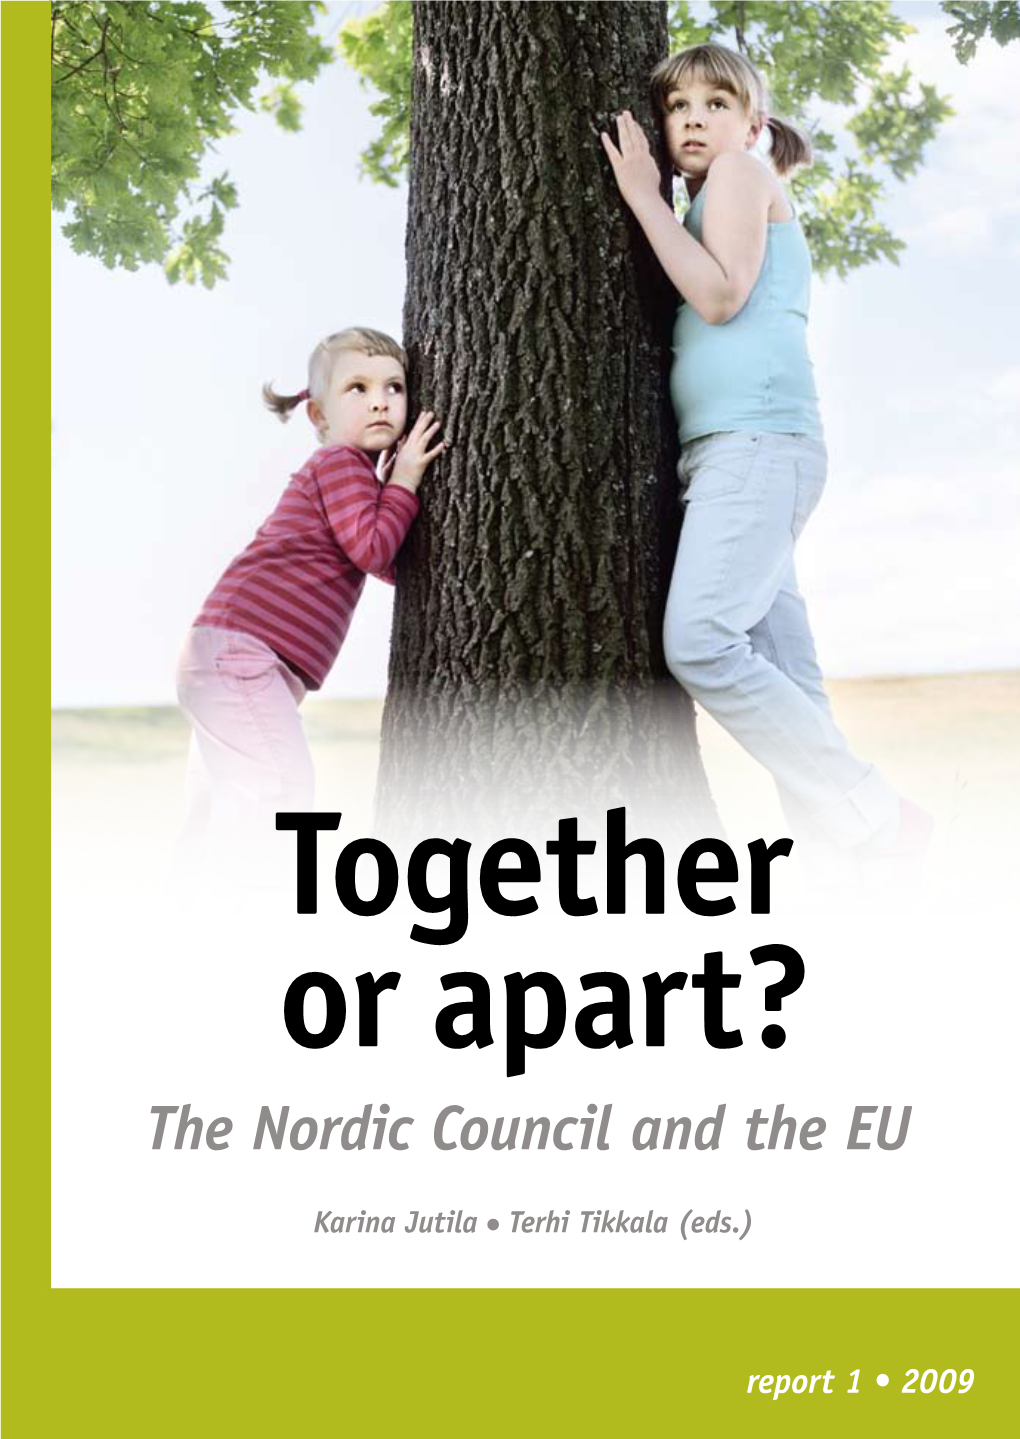 The Nordic Council and the EU